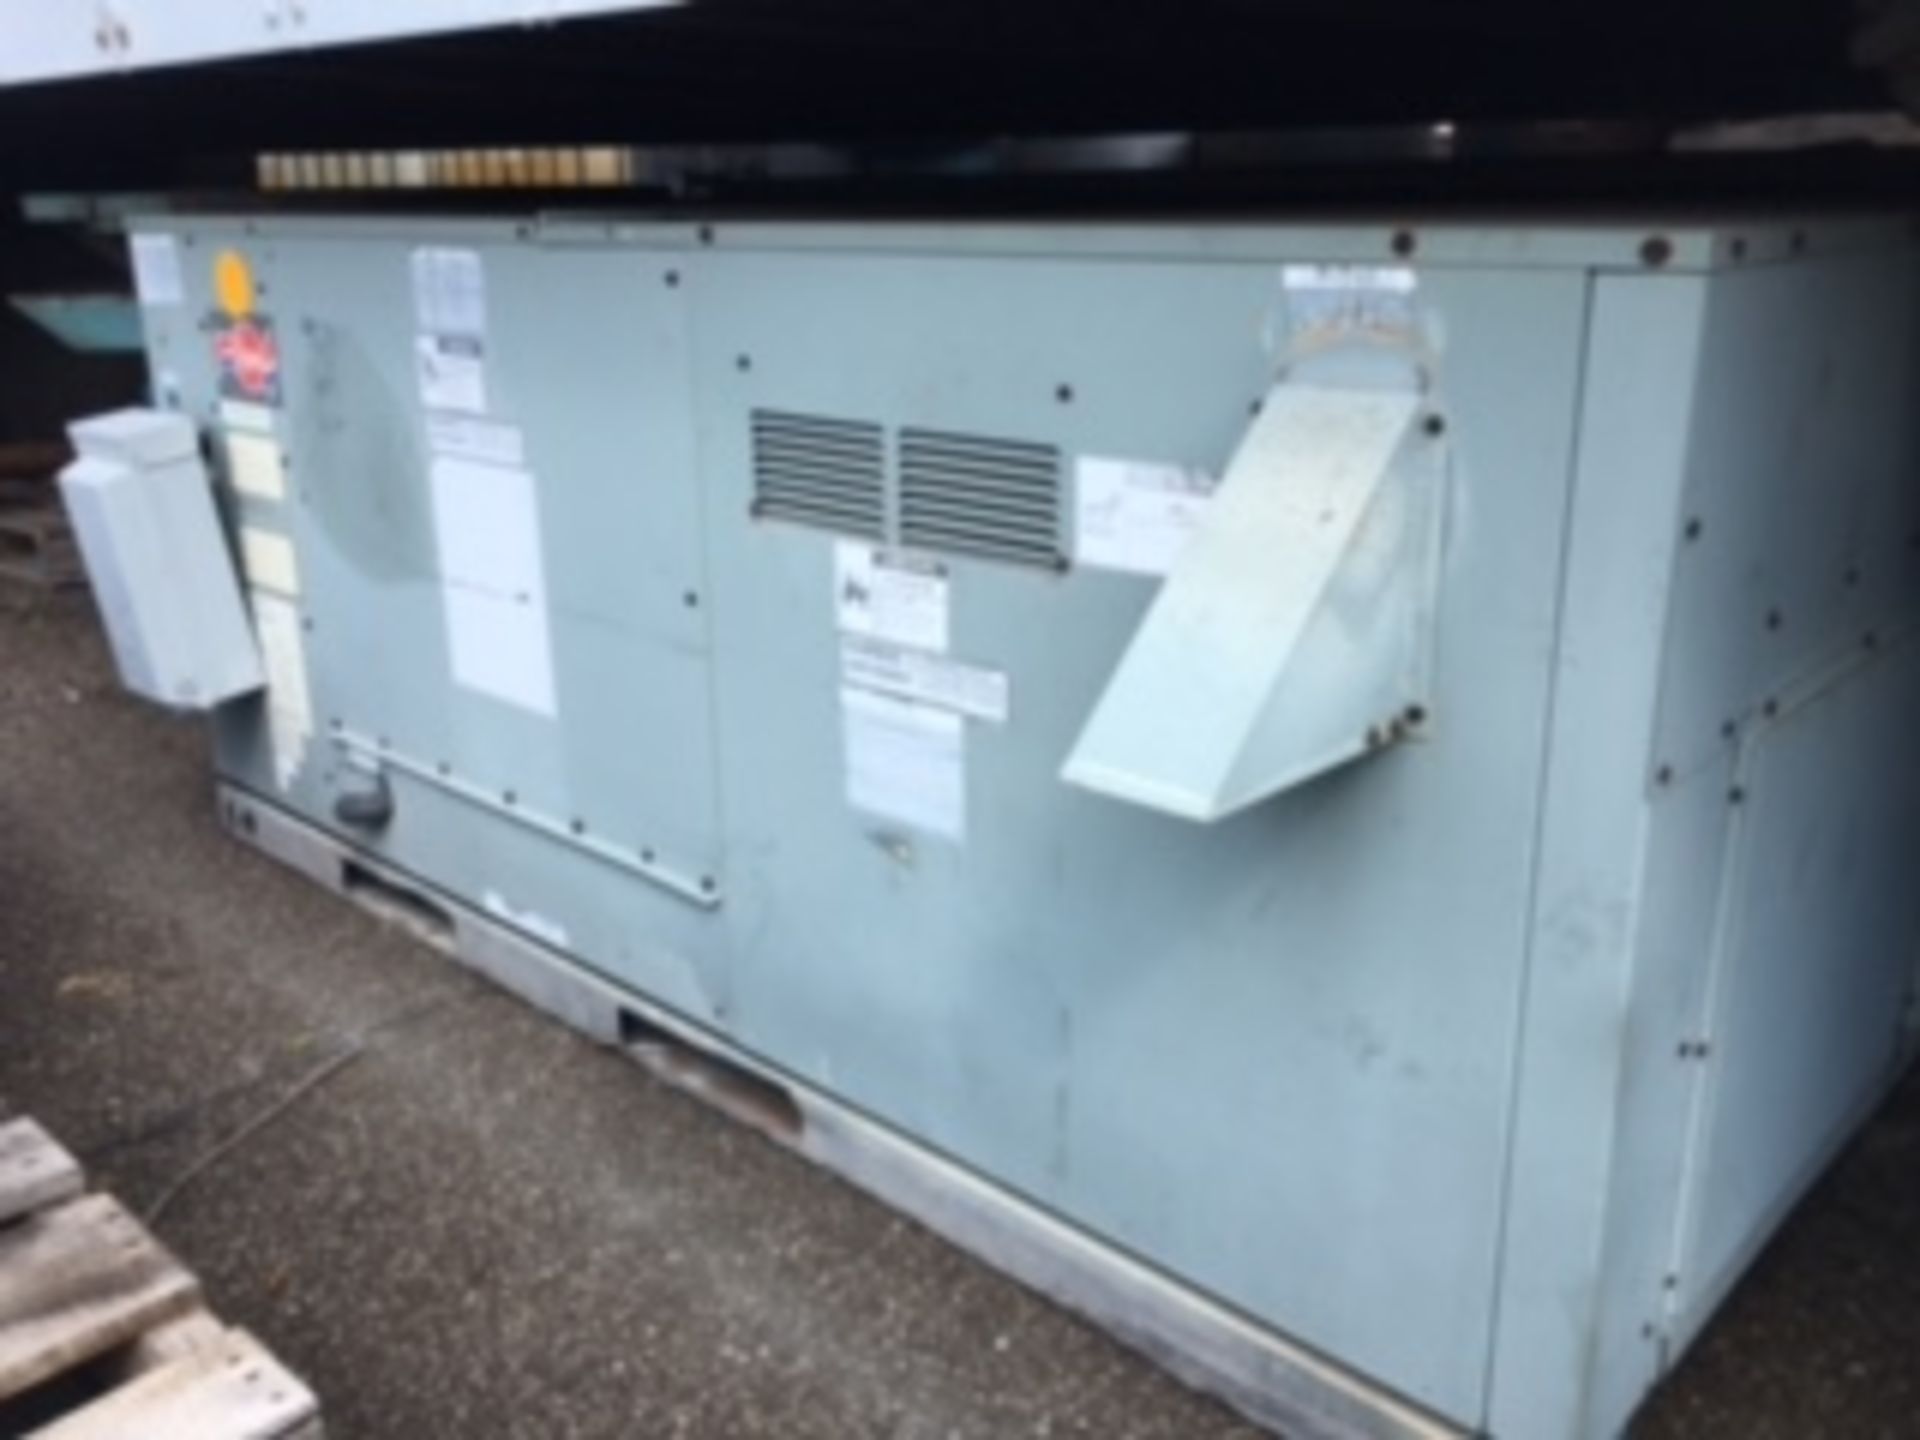 Rheem 1995 roof top AC unit. (Used once and decided it was not big enough). 24 volt wiring, 200,